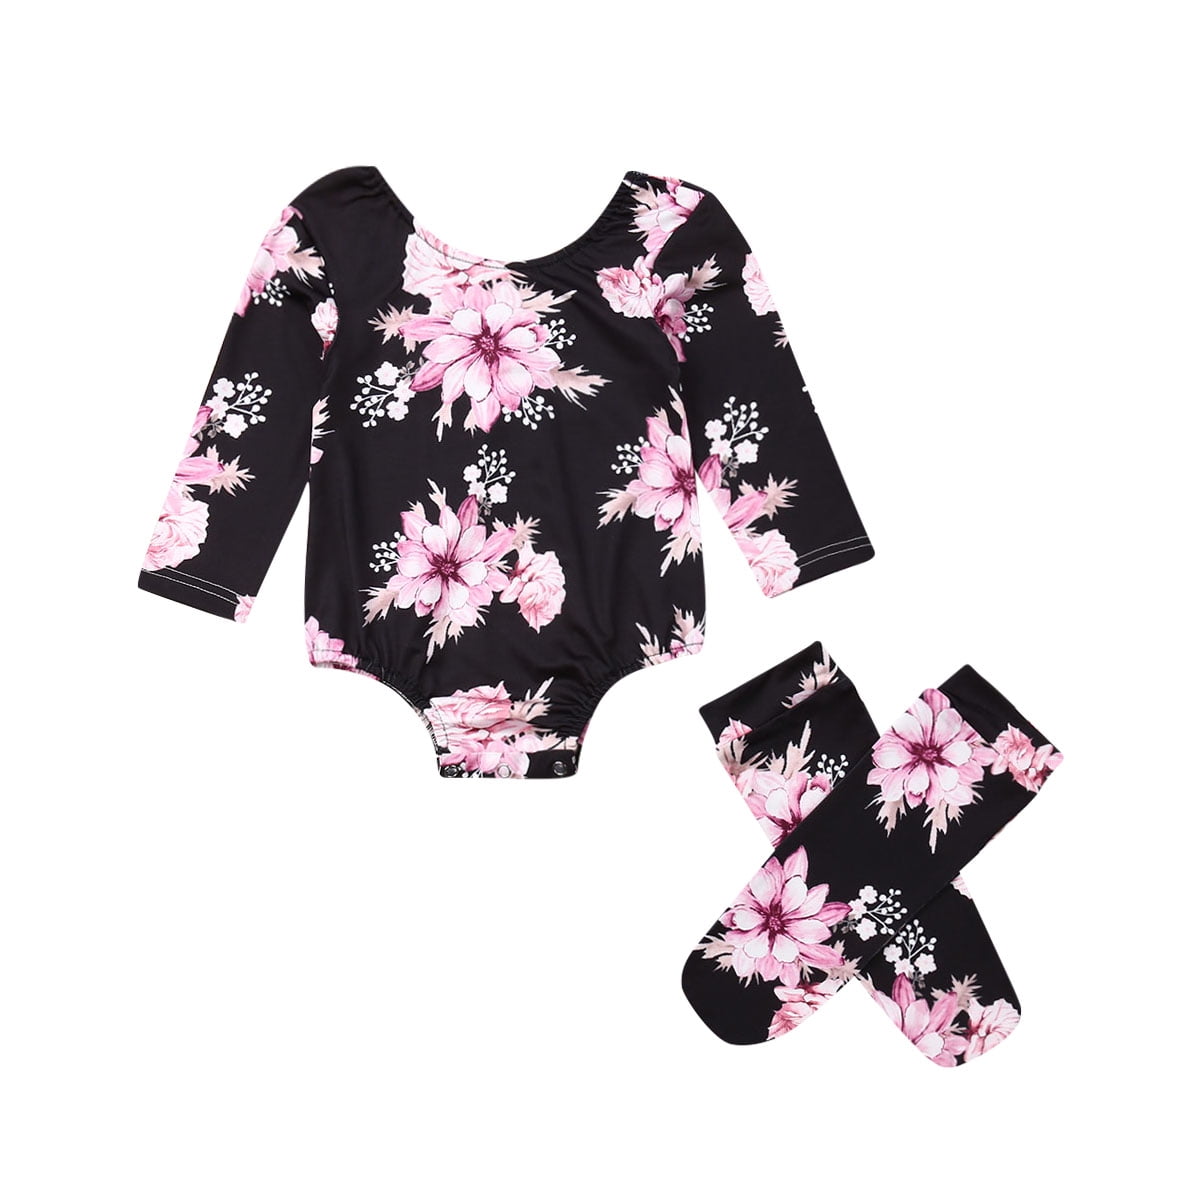 Kids Baby Girls Flowers Long Sleeve Romper Toddler Bodysuit Jumpsuit Outfits Top 